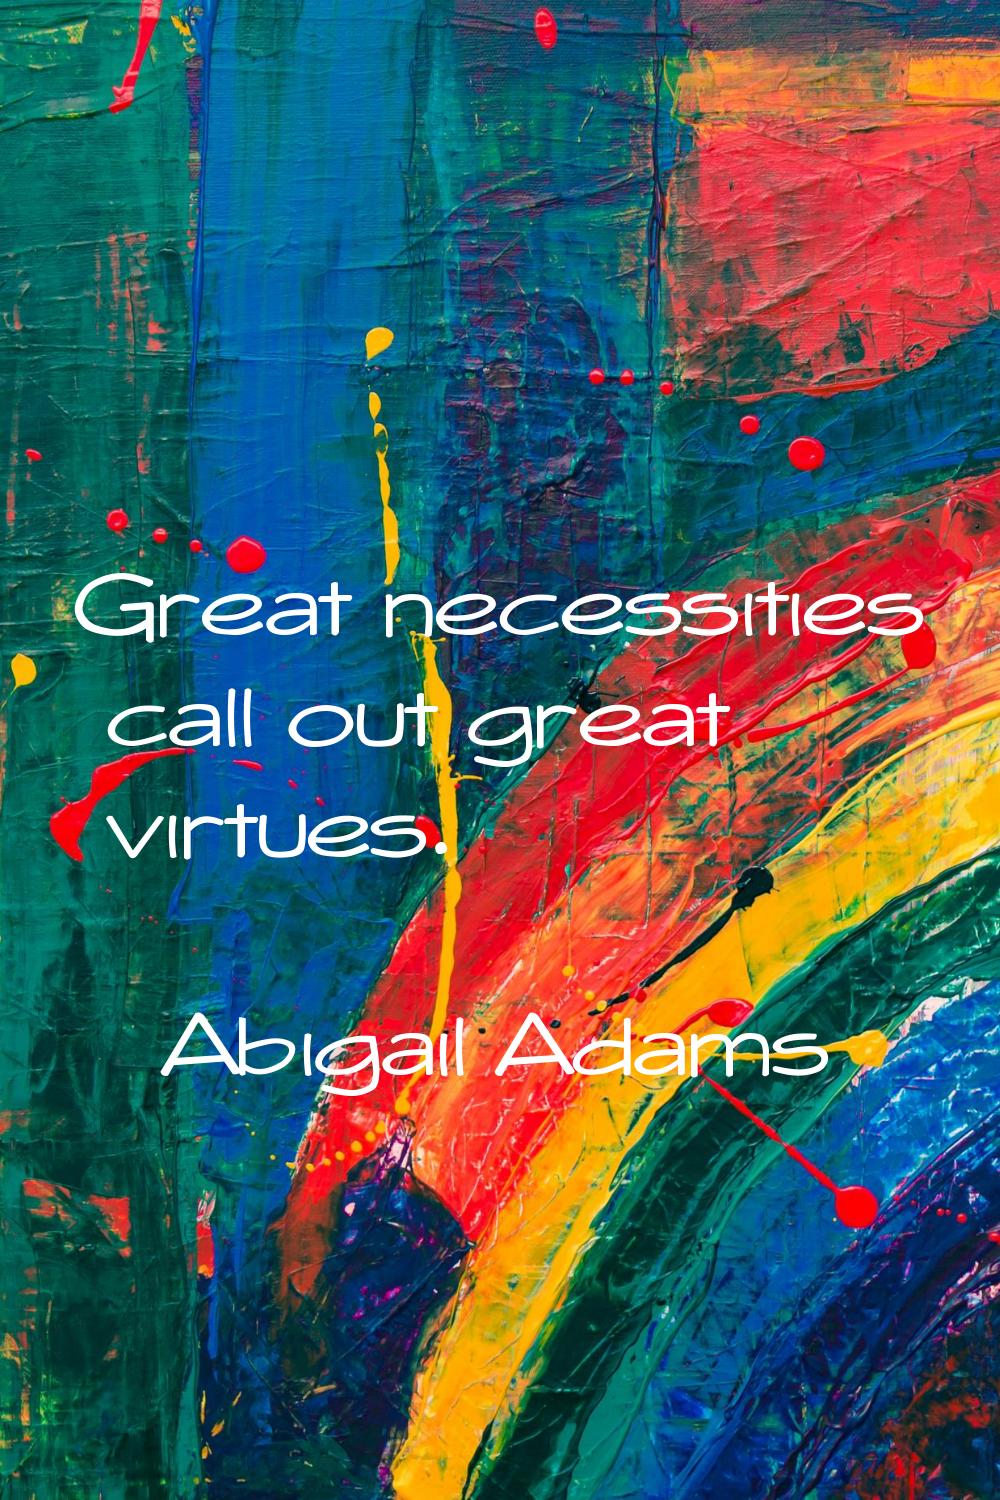 Great necessities call out great virtues.